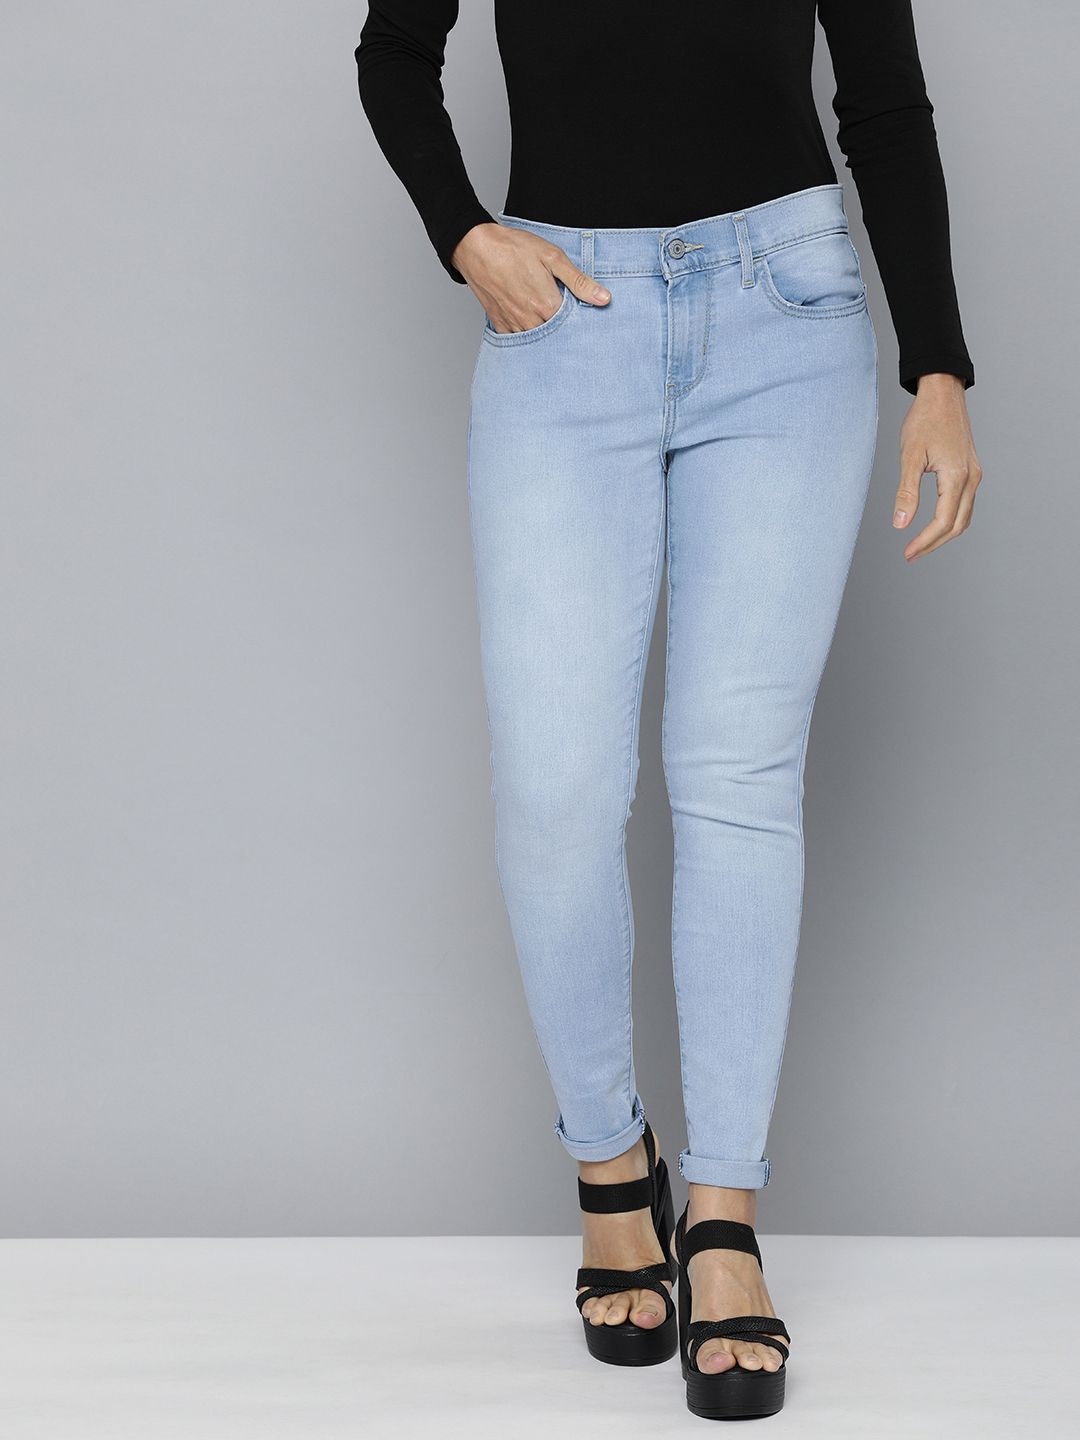 Levis Women Blue Super Skinny Fit Light Fade Stretchable Jeans Price in India